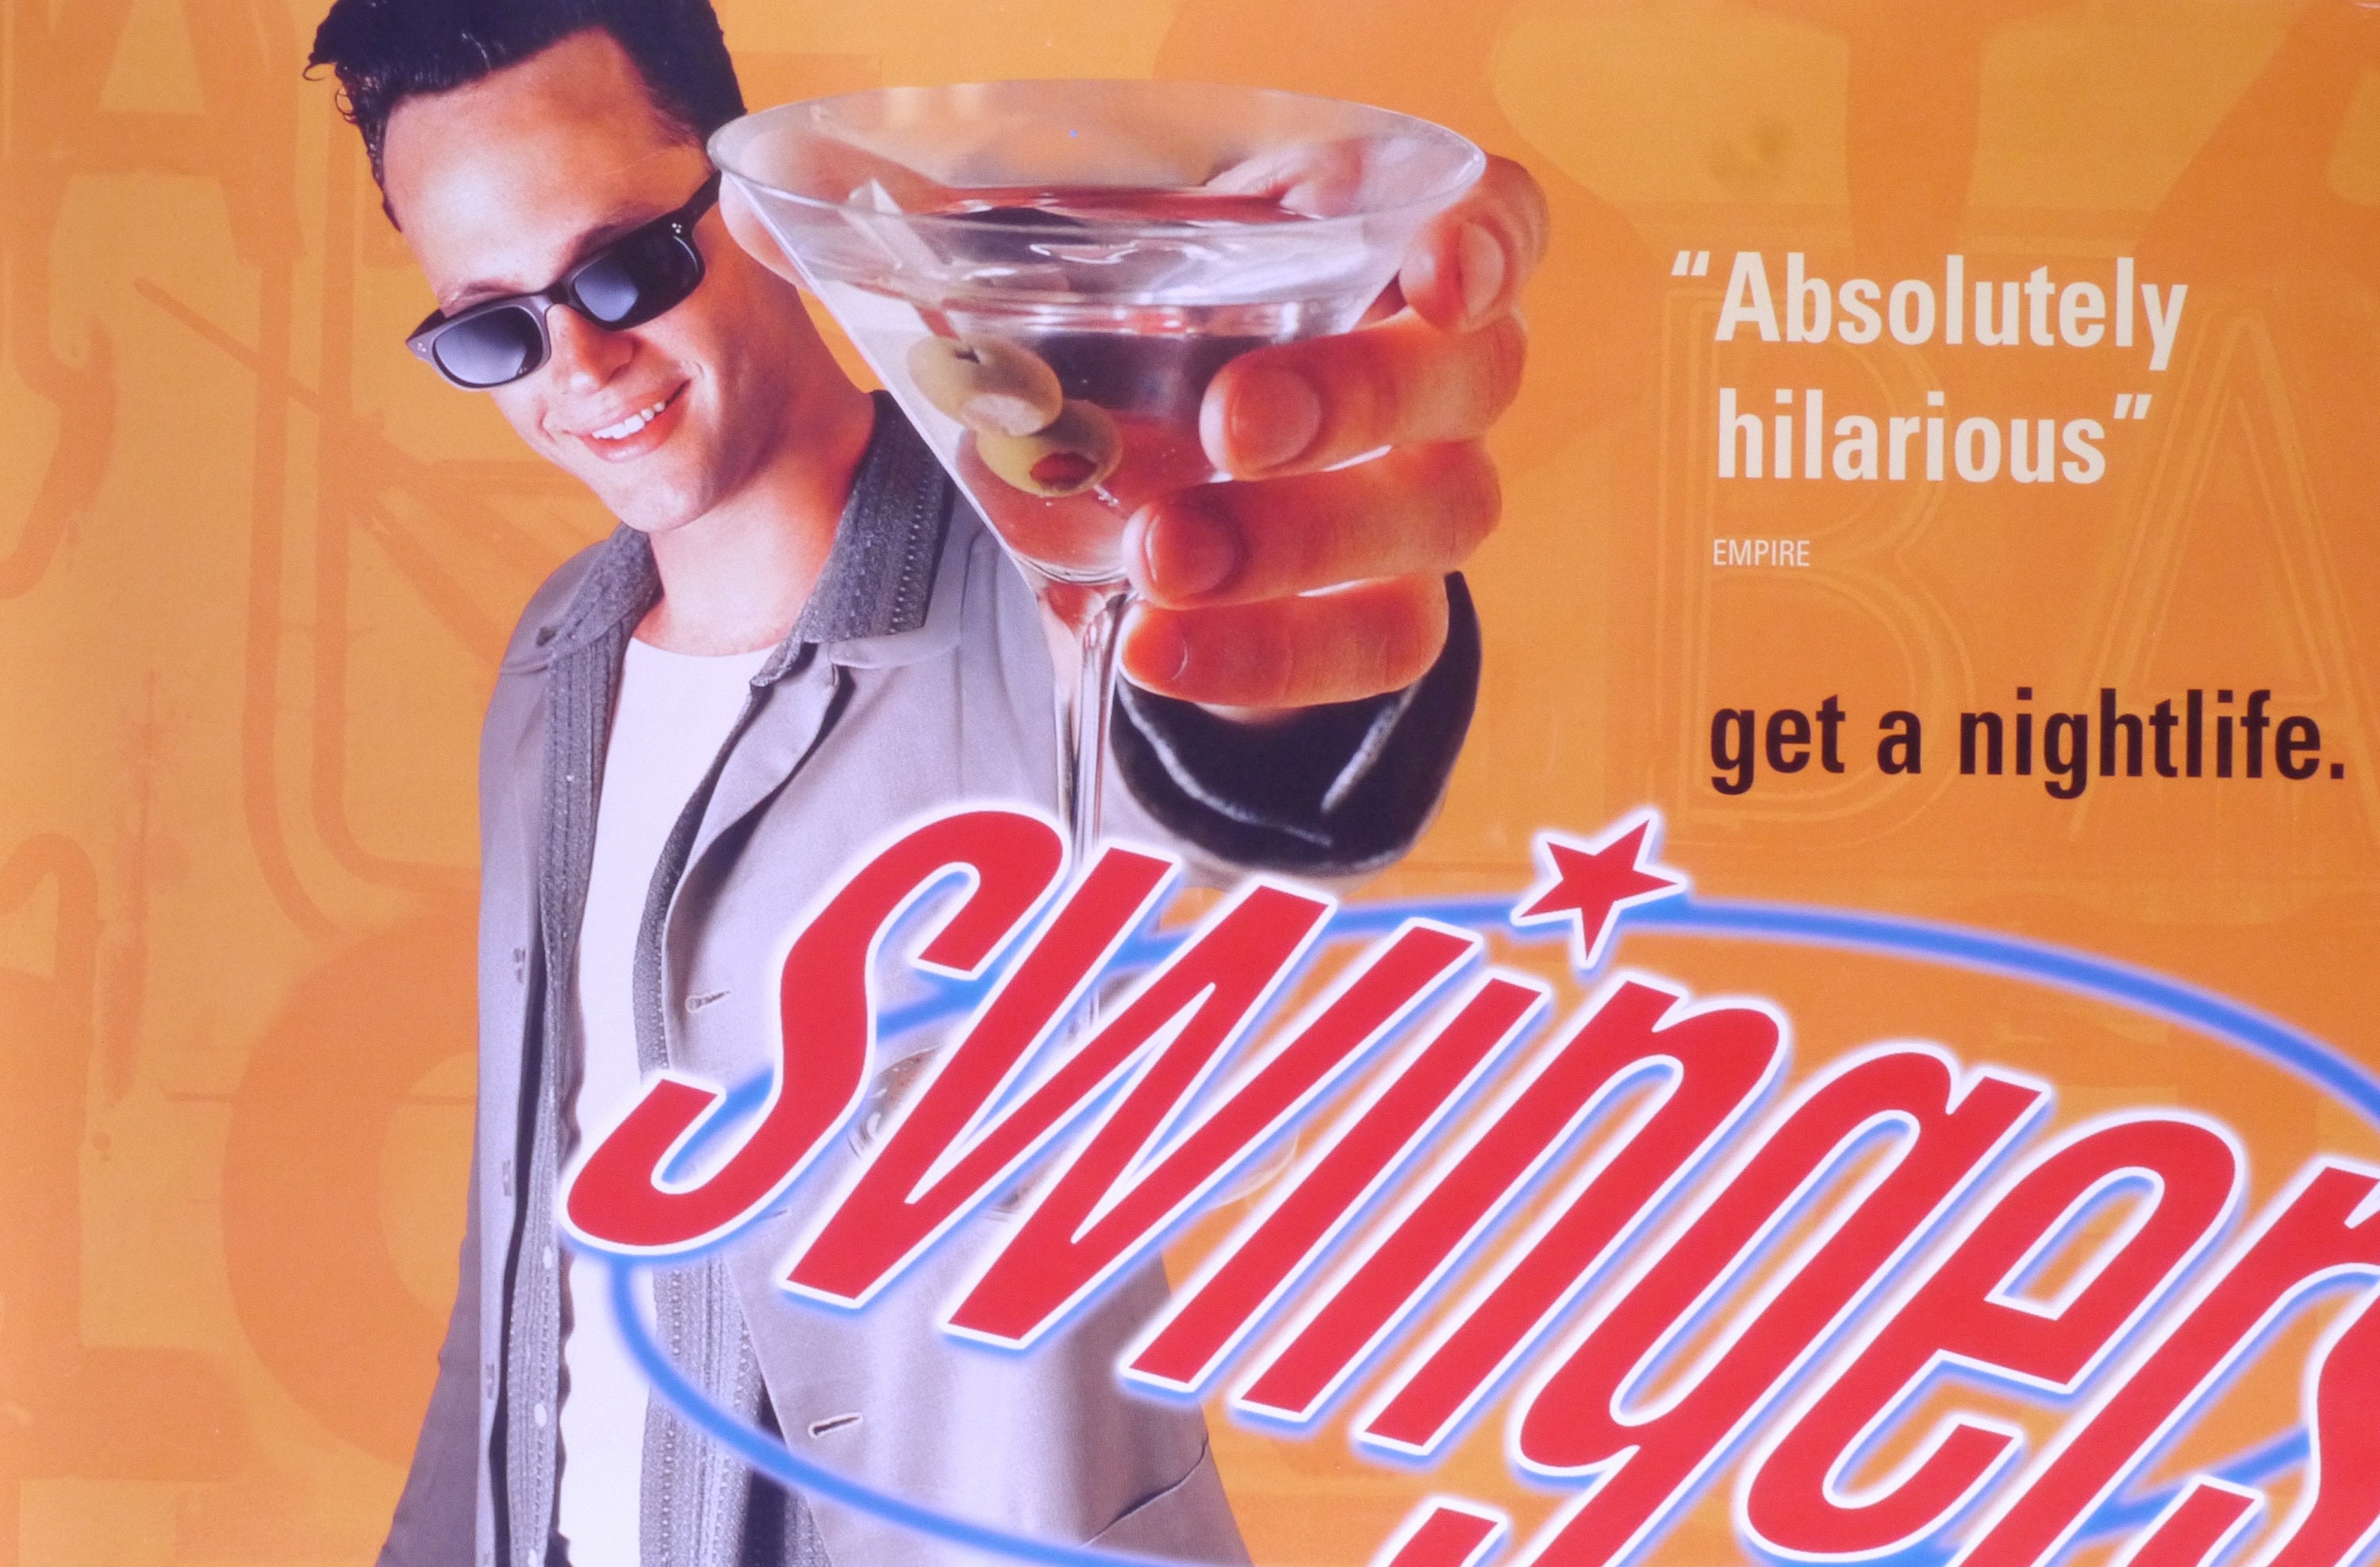 Swingers-an Original Vintage Movie Poster for Doug Liman pic pic